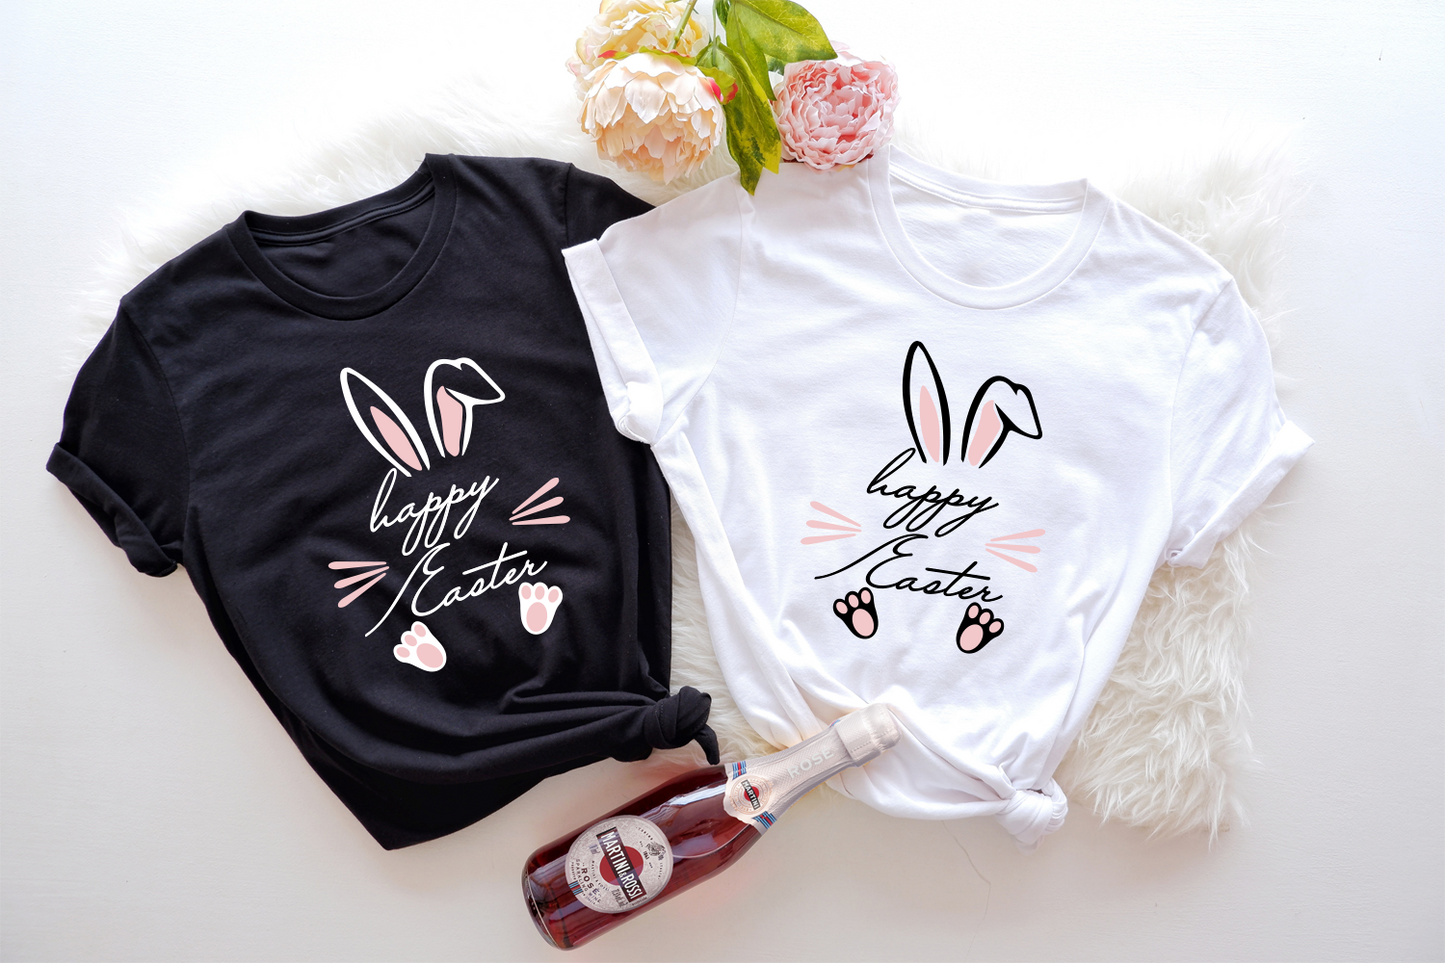 Hop into Easter fun with our adorable and festive Easter Bunny shirts!